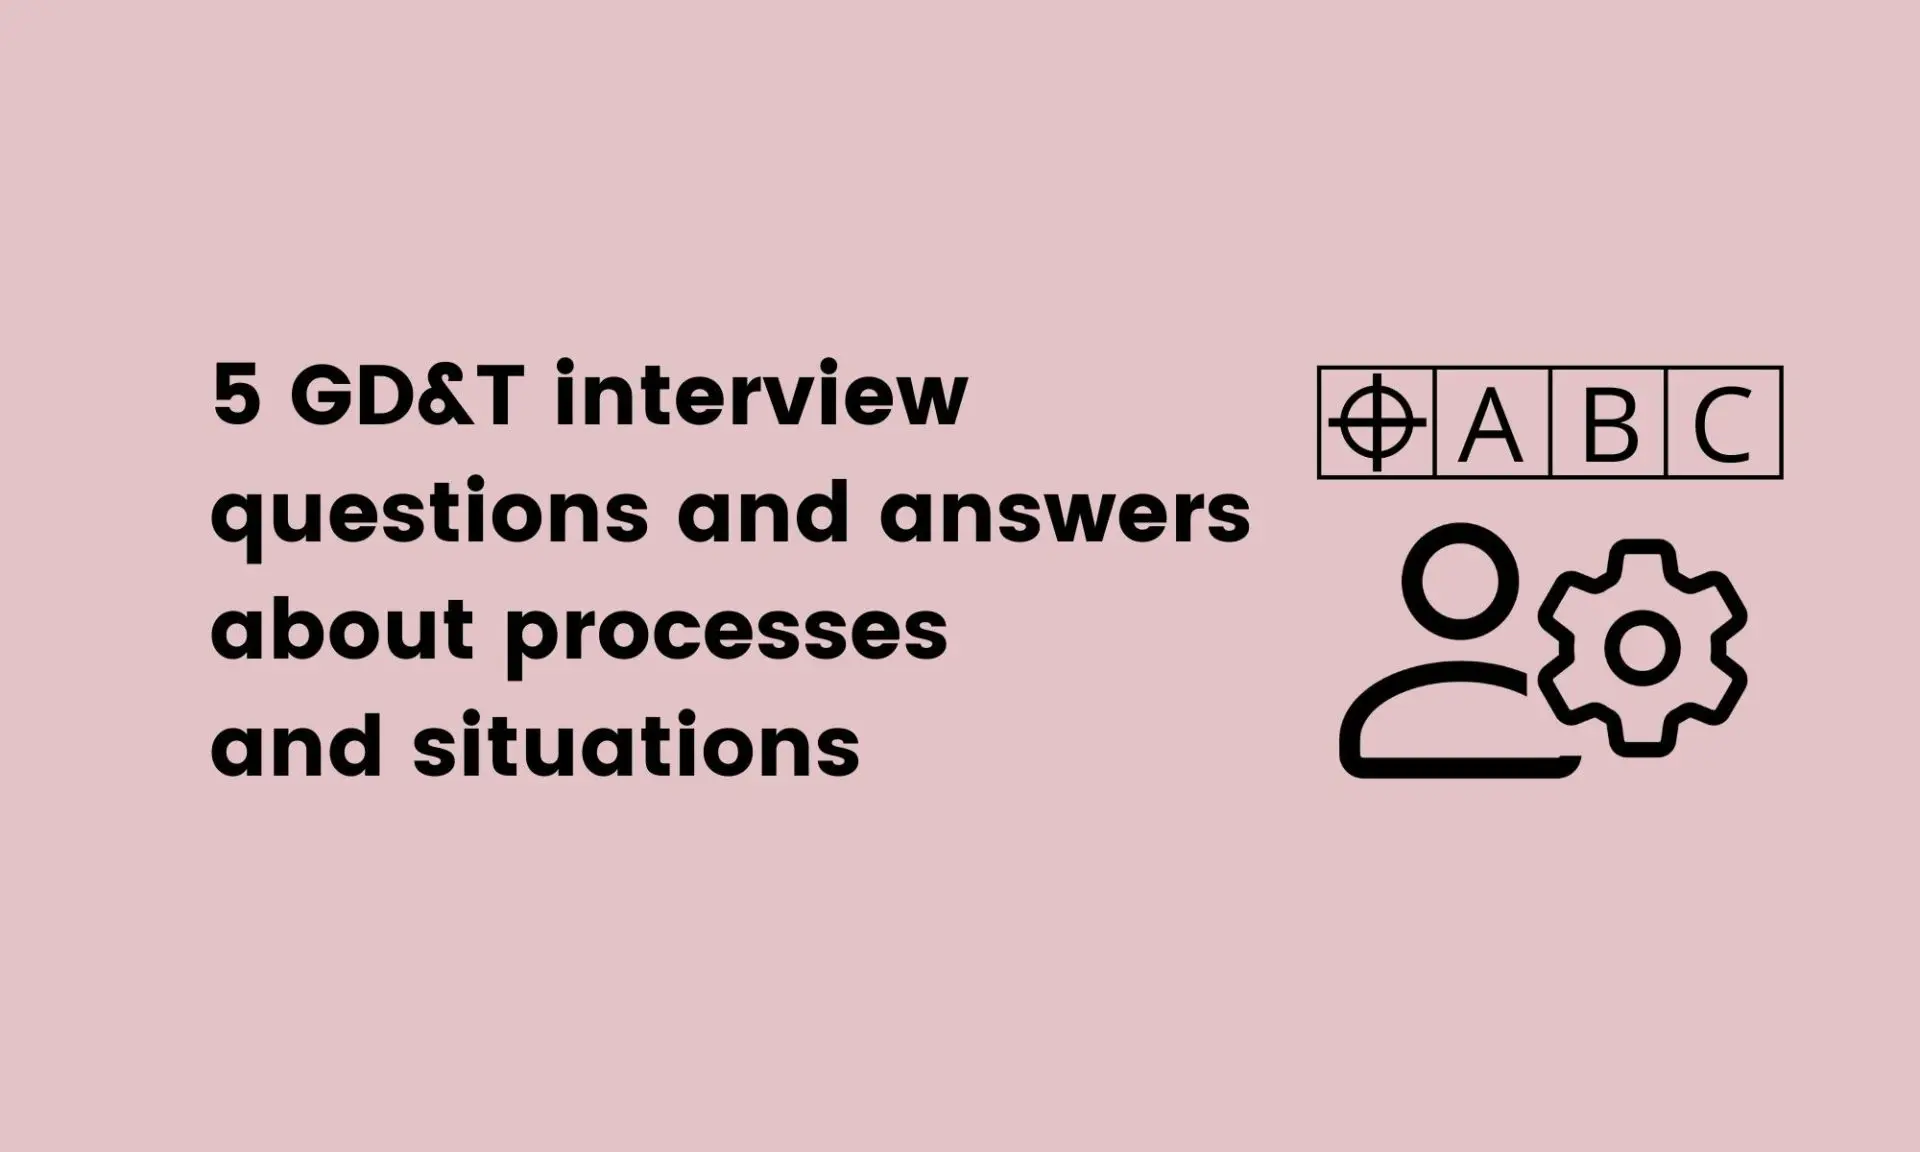 5 GD&T interview questions and answers about processes and situations